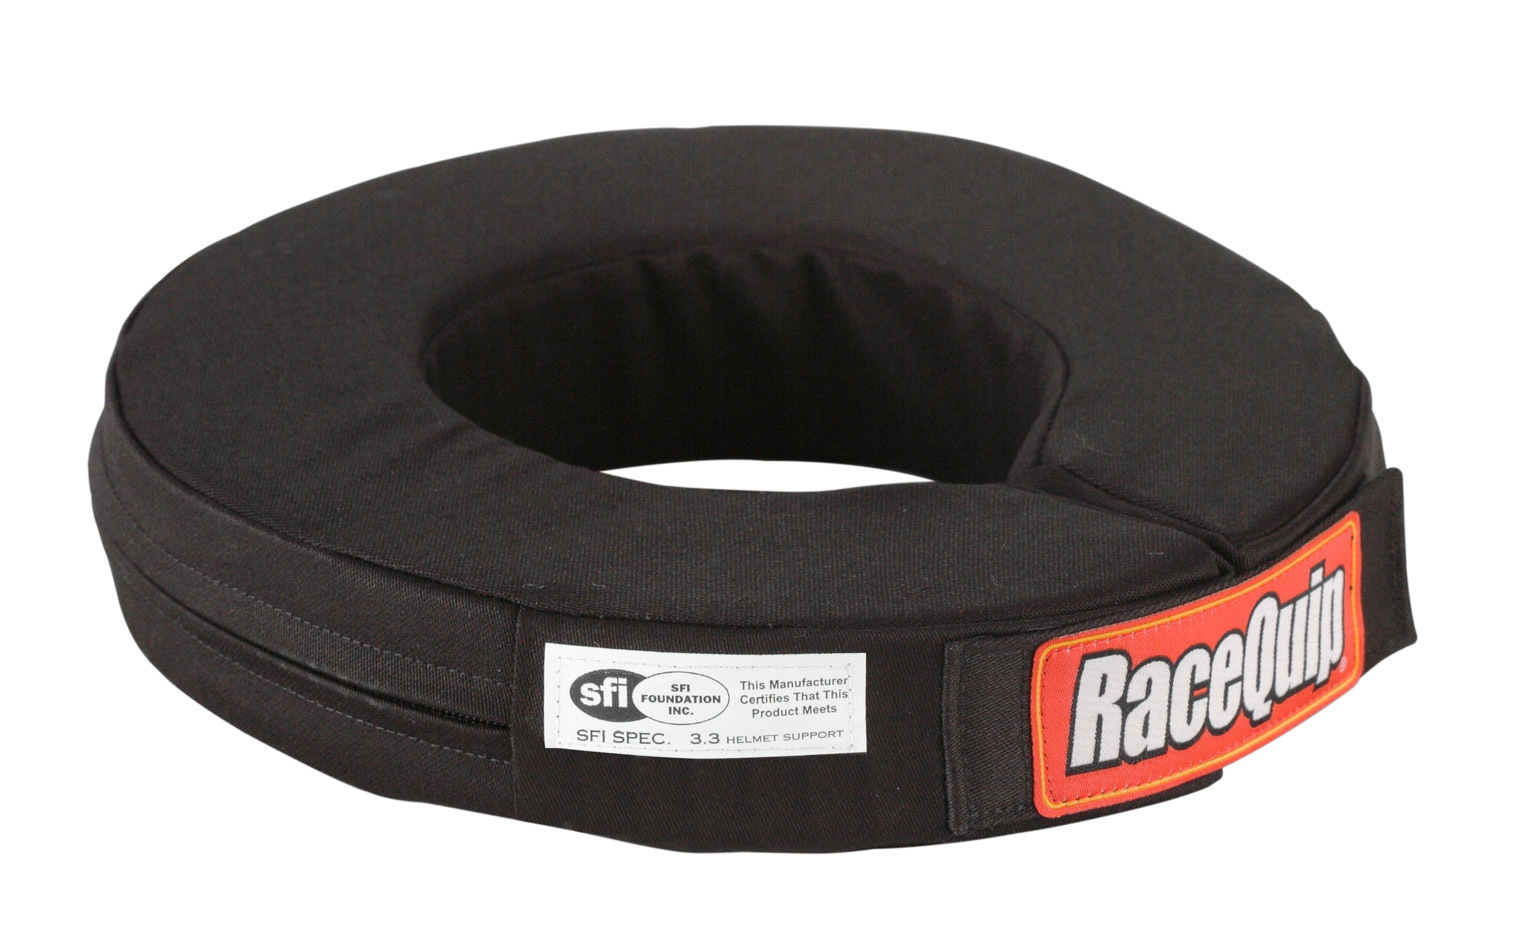 Racequip 3370097 Neck Support, 360 Degree, SFI 3.3, Padded, Fire Retardant Cotton Cover, Black, Youth Size, Each